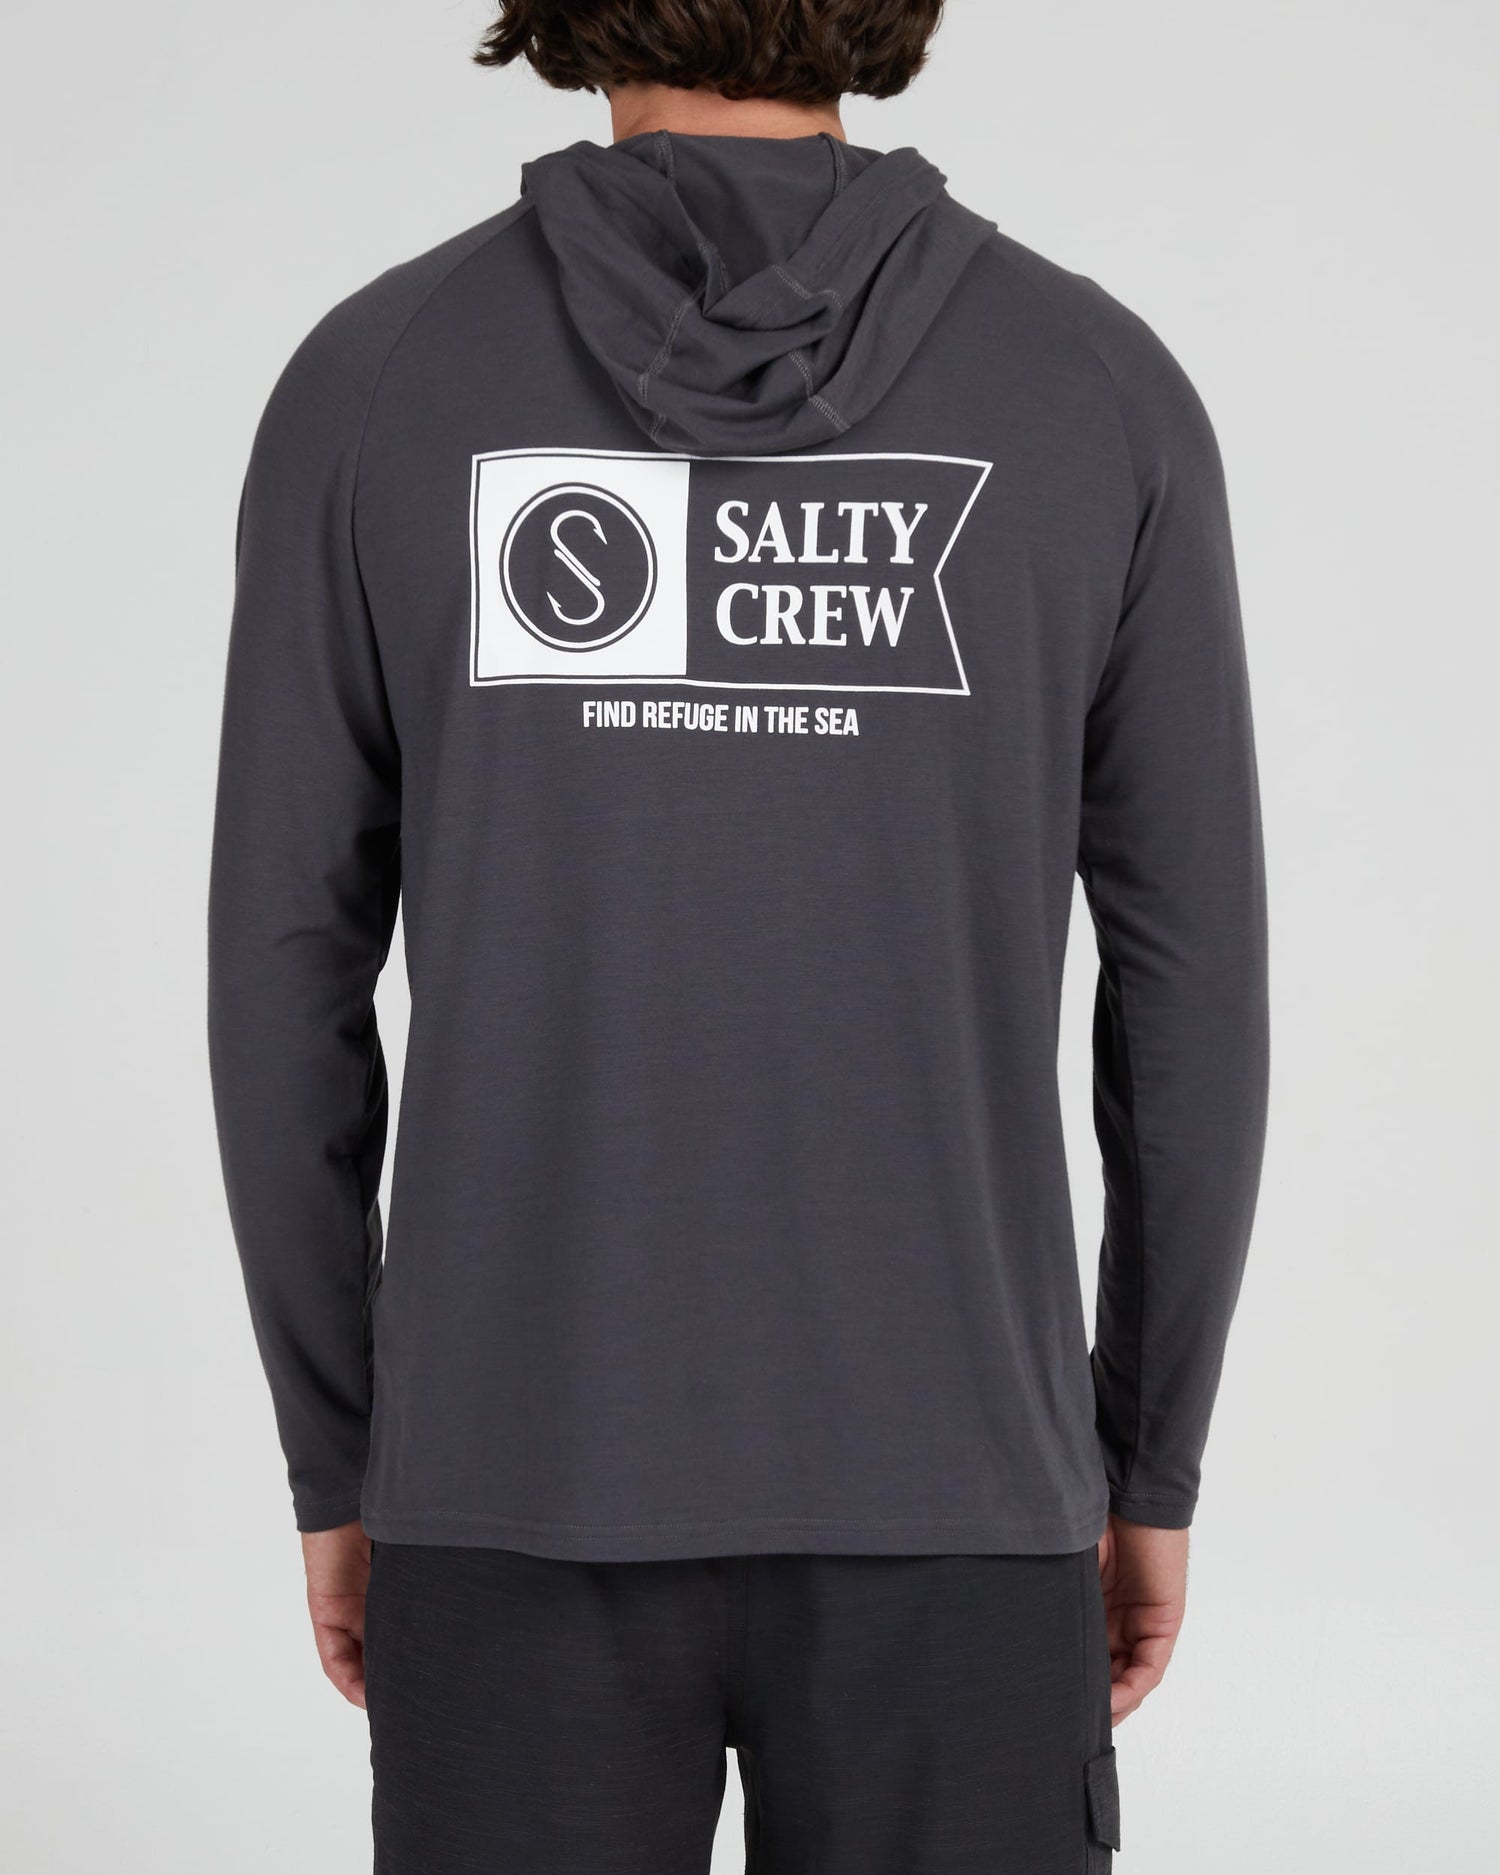 Salty crew SUN PROTECTION MARINER UV HOOD - Charcoal in Charcoal